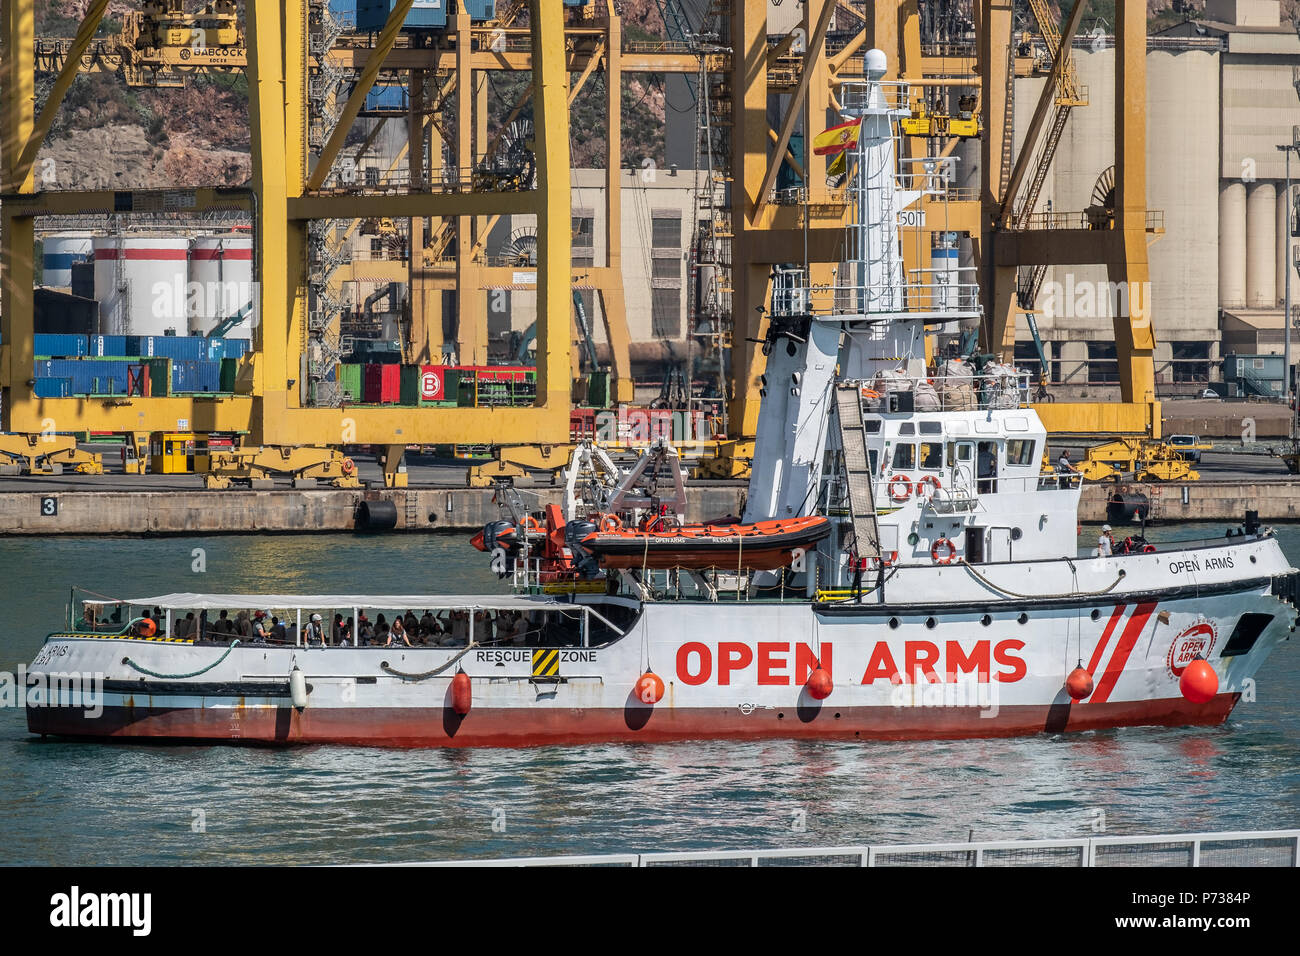 The rescue boat Proactiva Open Arms has docked in Barcelona with 60 people rescued in the Mediterranean off the coast of Libya. Barcelona has offered itself as a refuge city after Italy's refusal to continue hosting more rescues carried out by NGOs. Stock Photo